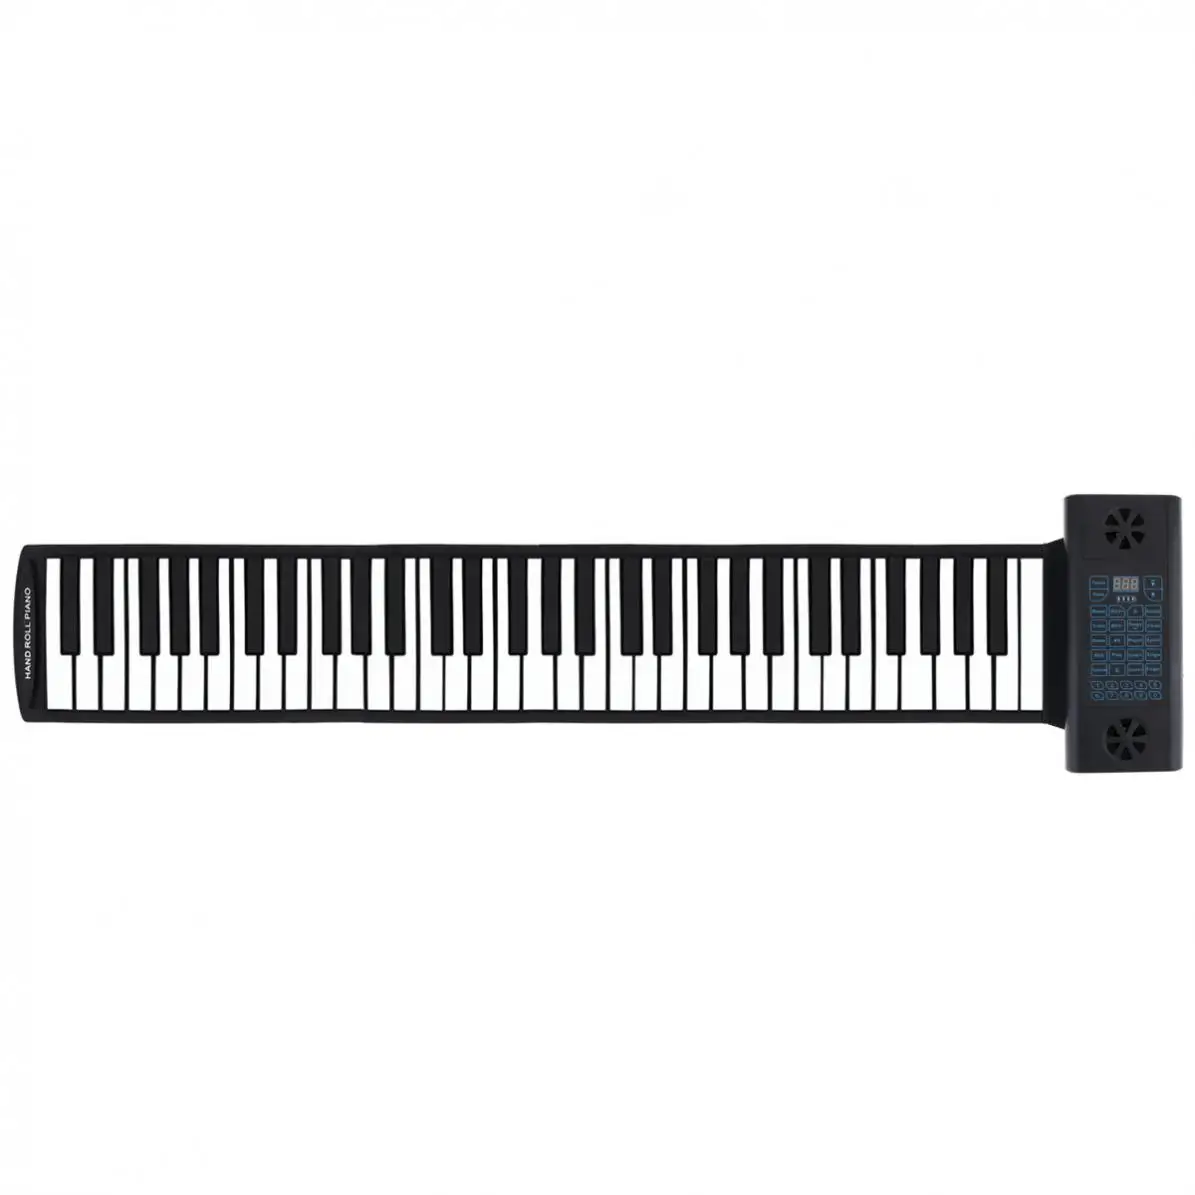 61 Keys MIDI Roll Up Electronic Piano Silicone Flexible Keyboard Organ Built-in 2 Speakers Support Audio Bluetooth Function enlarge